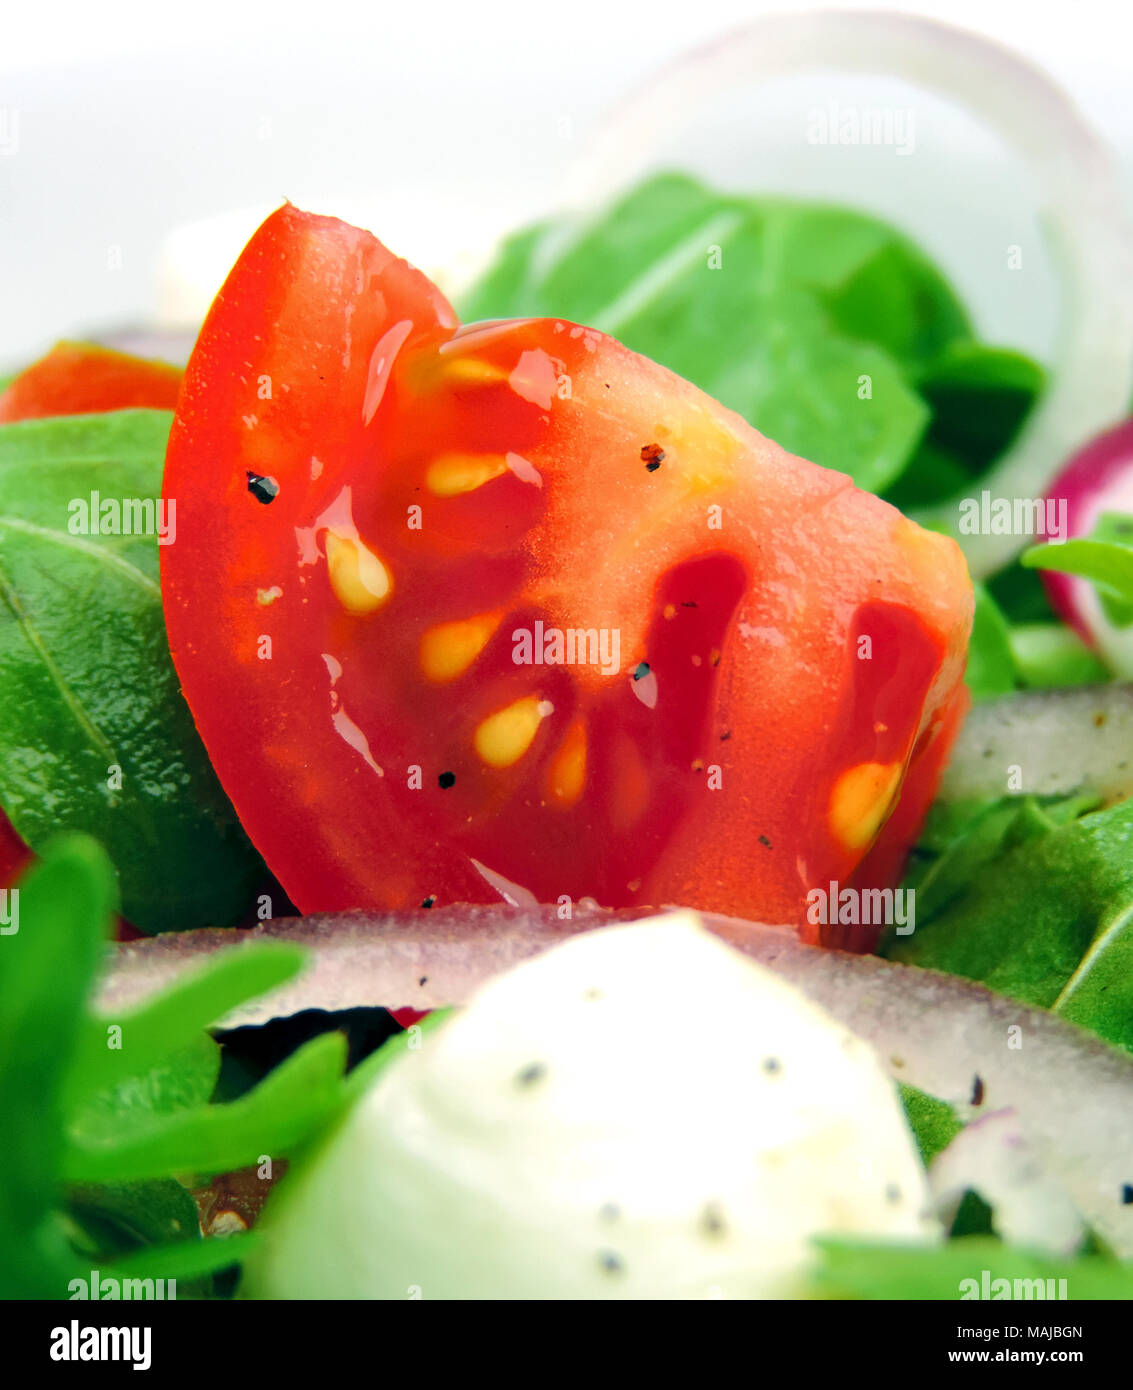 Gourmet salad or fresh Caprese salad with tomatoes, red onions, rocket and mozzarella cheese on a white plate. Close-up shot of fresh salad. Stock Photo